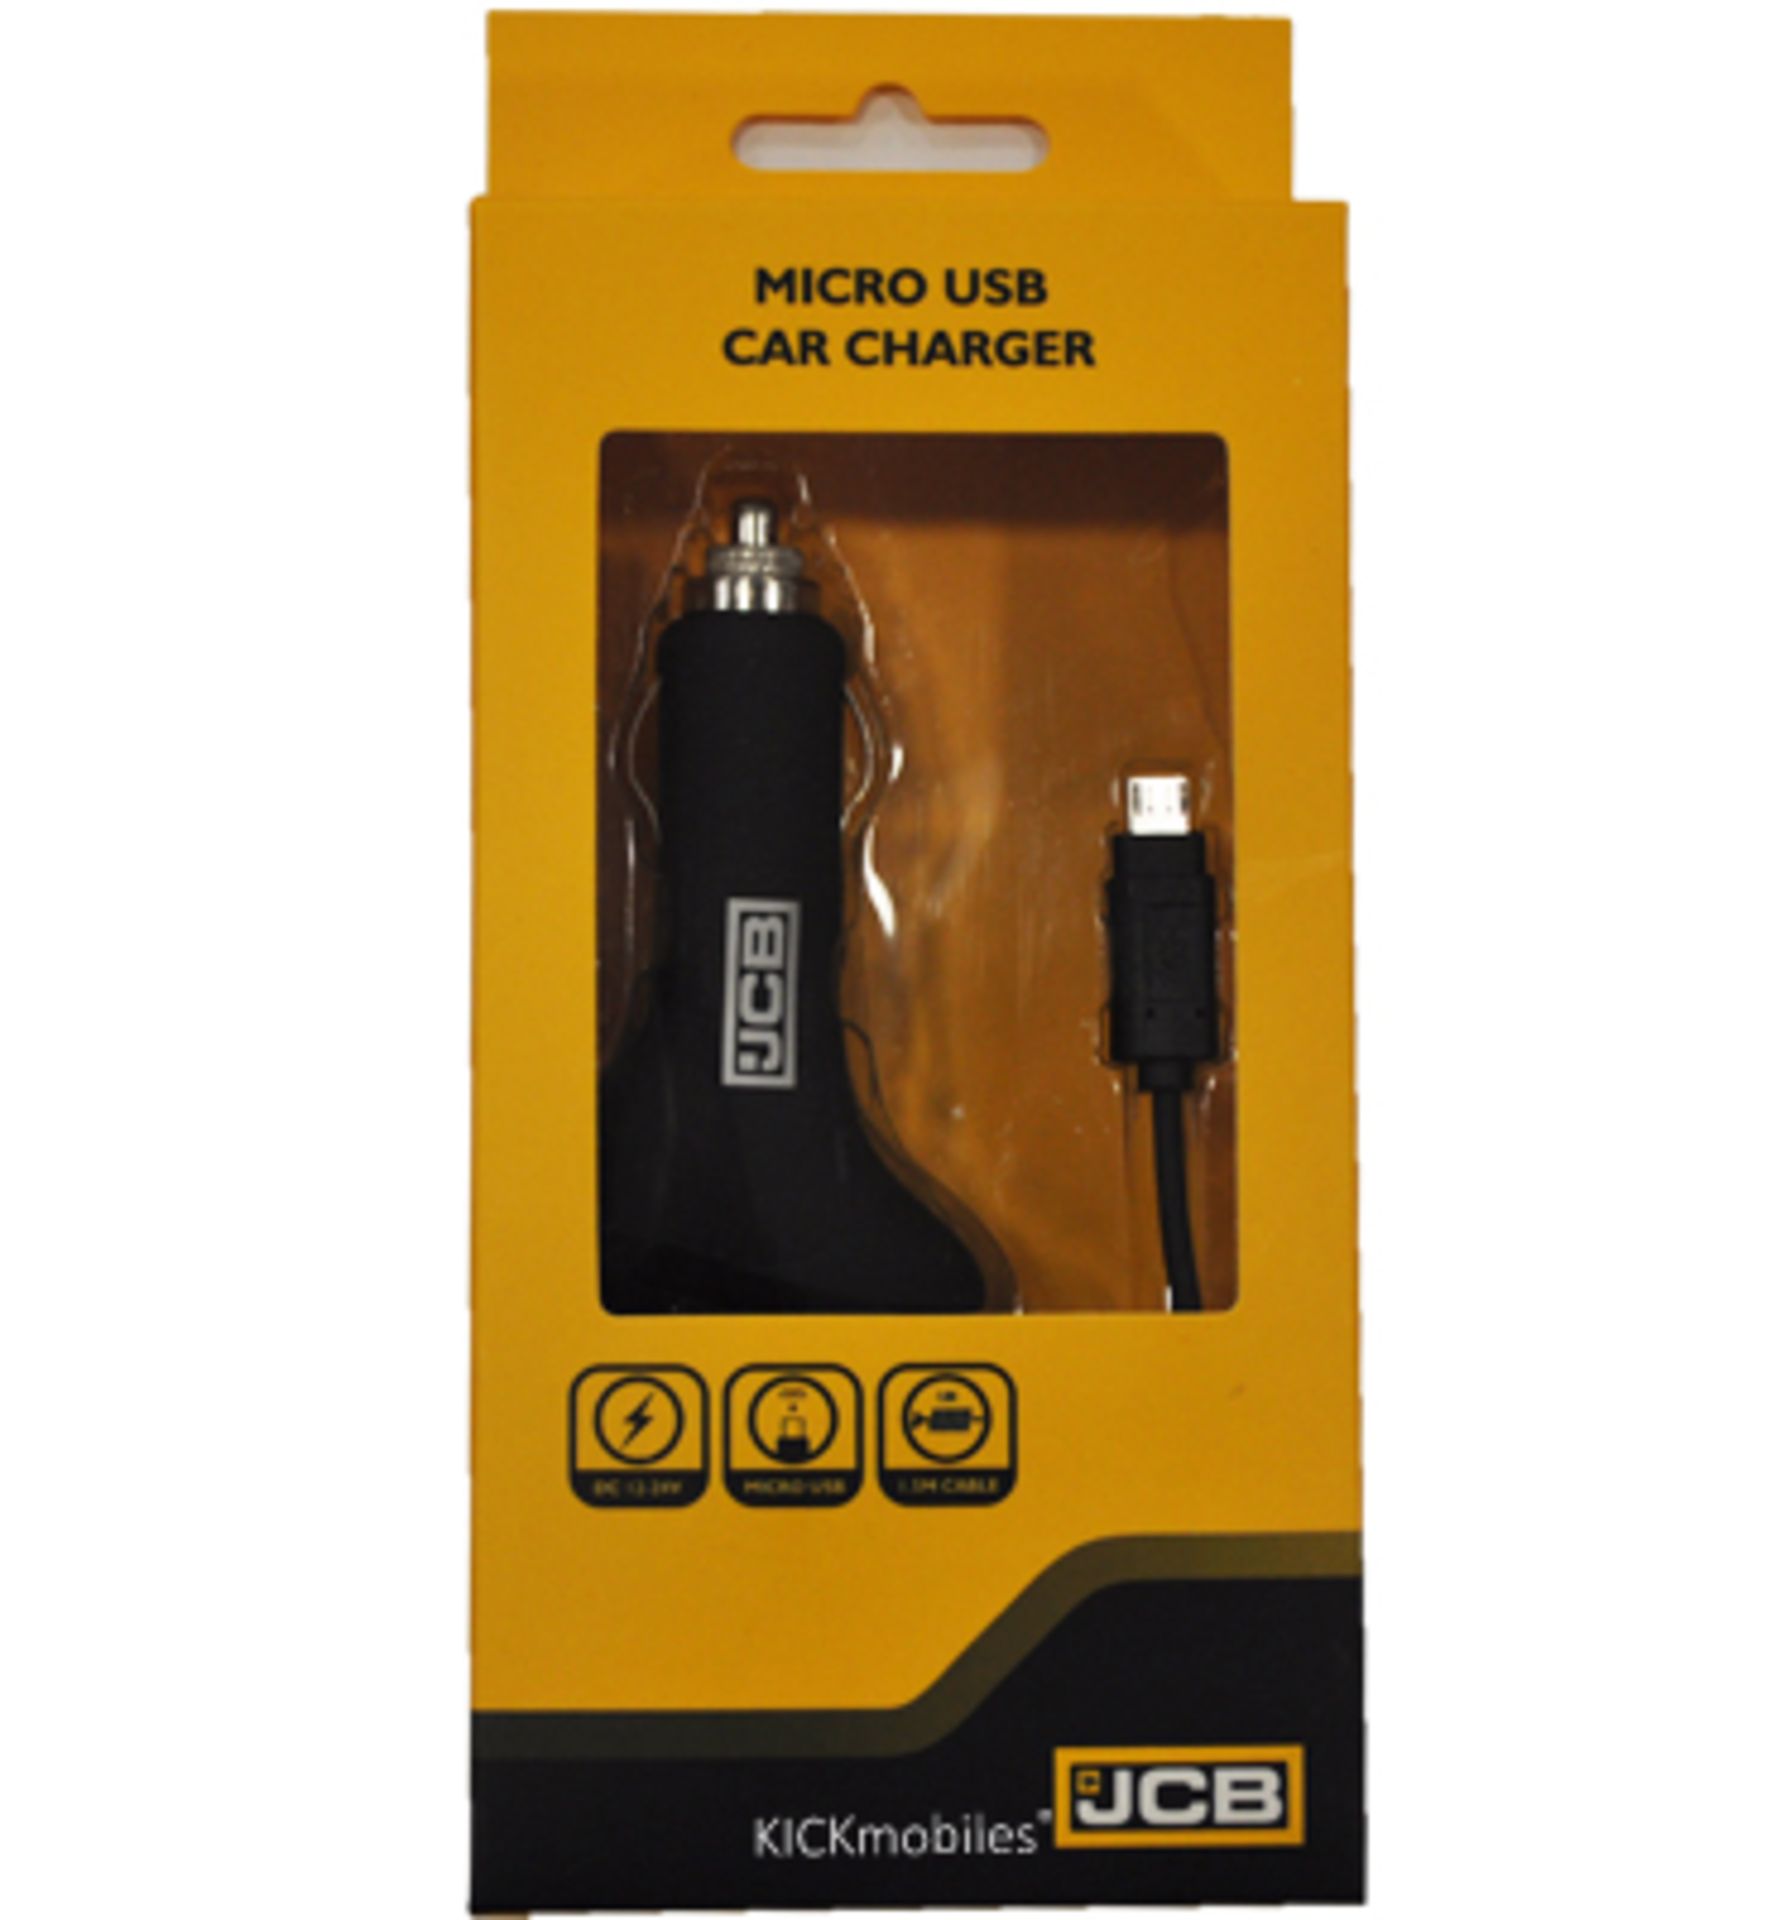 V Brand New JCB 12V Micro USB Car Charger - DC 12-24V - Micro USB Connector - 1.5M Coiled Cable - - Image 2 of 2